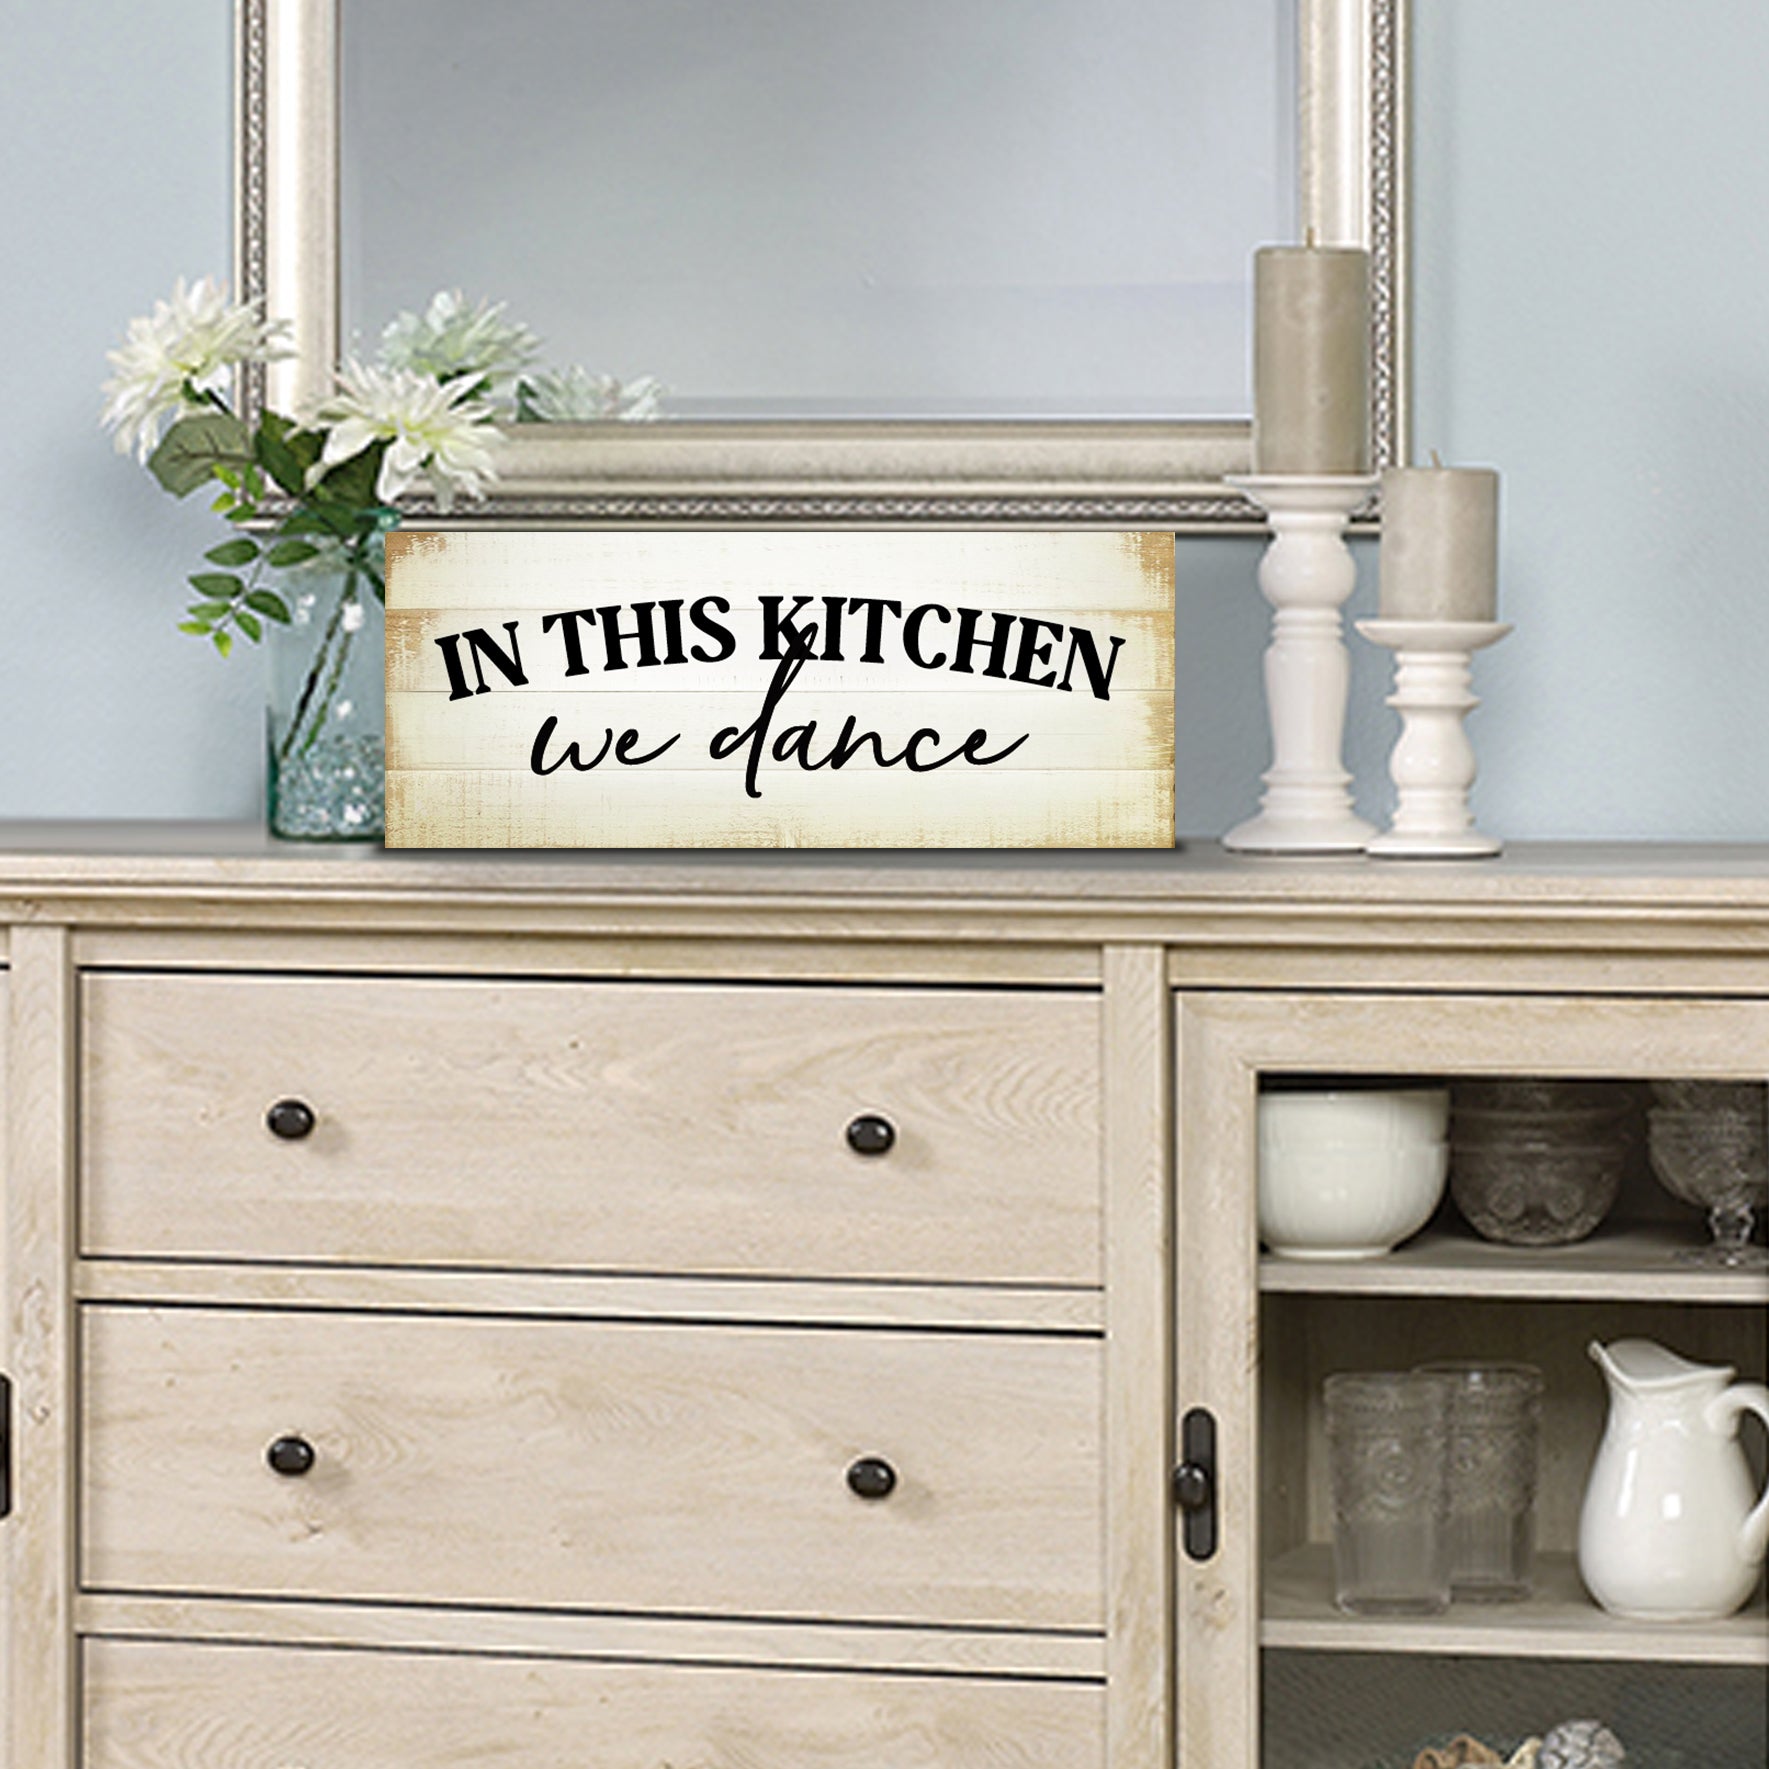 In This Kitchen We Dance Inspirational Wooden Wall Hanging Plaque Kitchen Home Décor For All Season Decoration - LifeSong Milestones